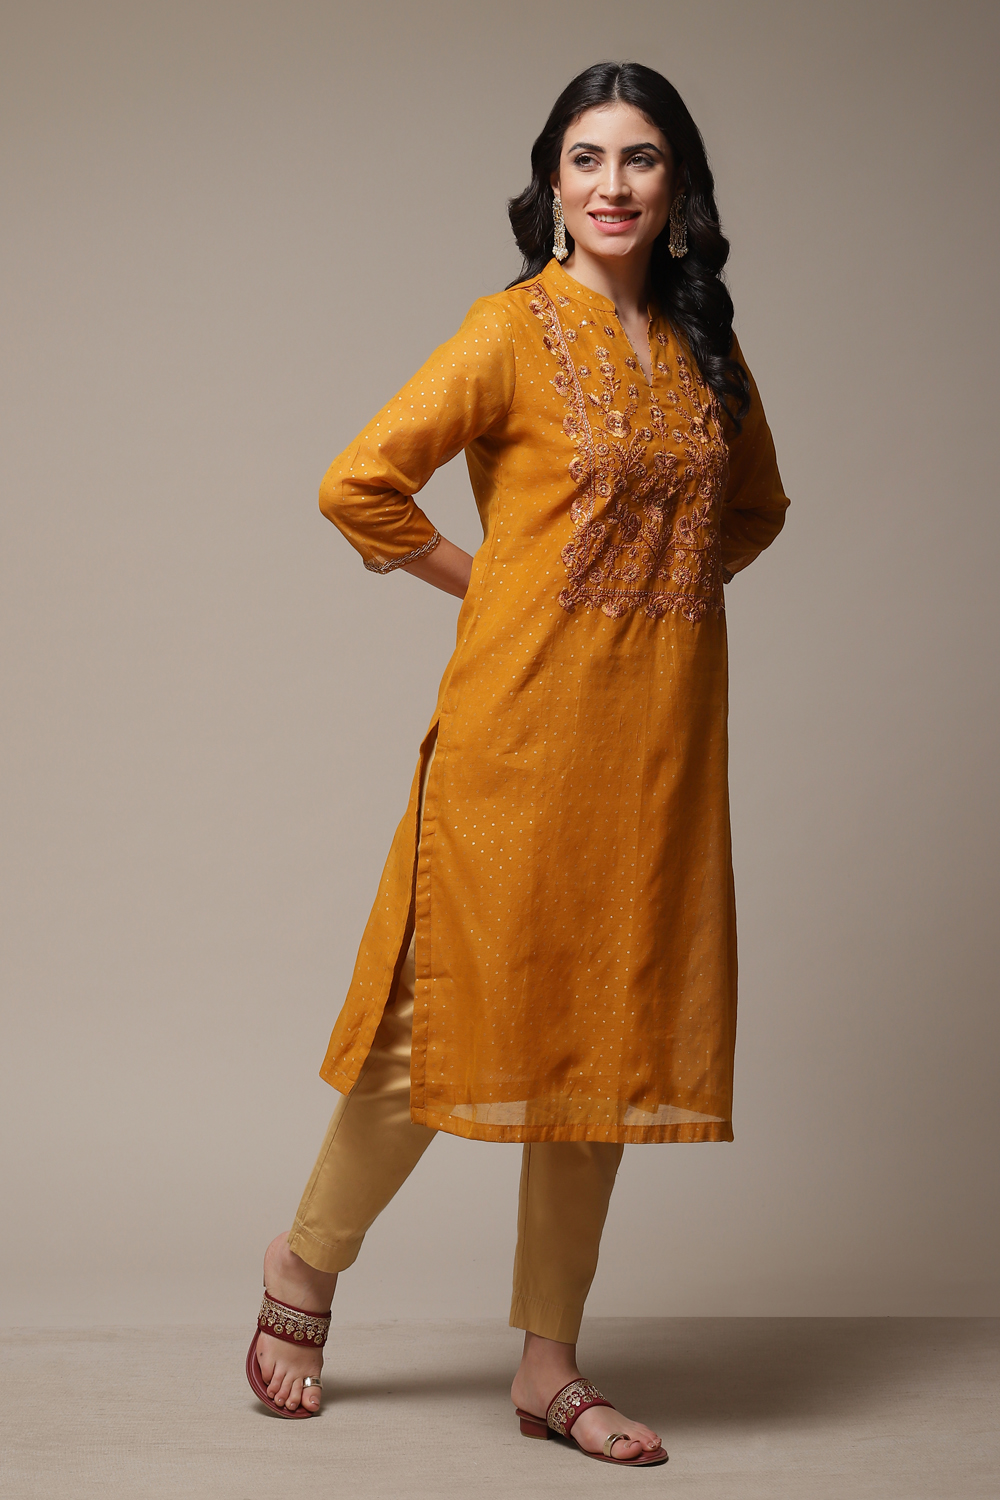 Buy online Off White & Blue Cotton IKAT Flared Kurta for women at ...